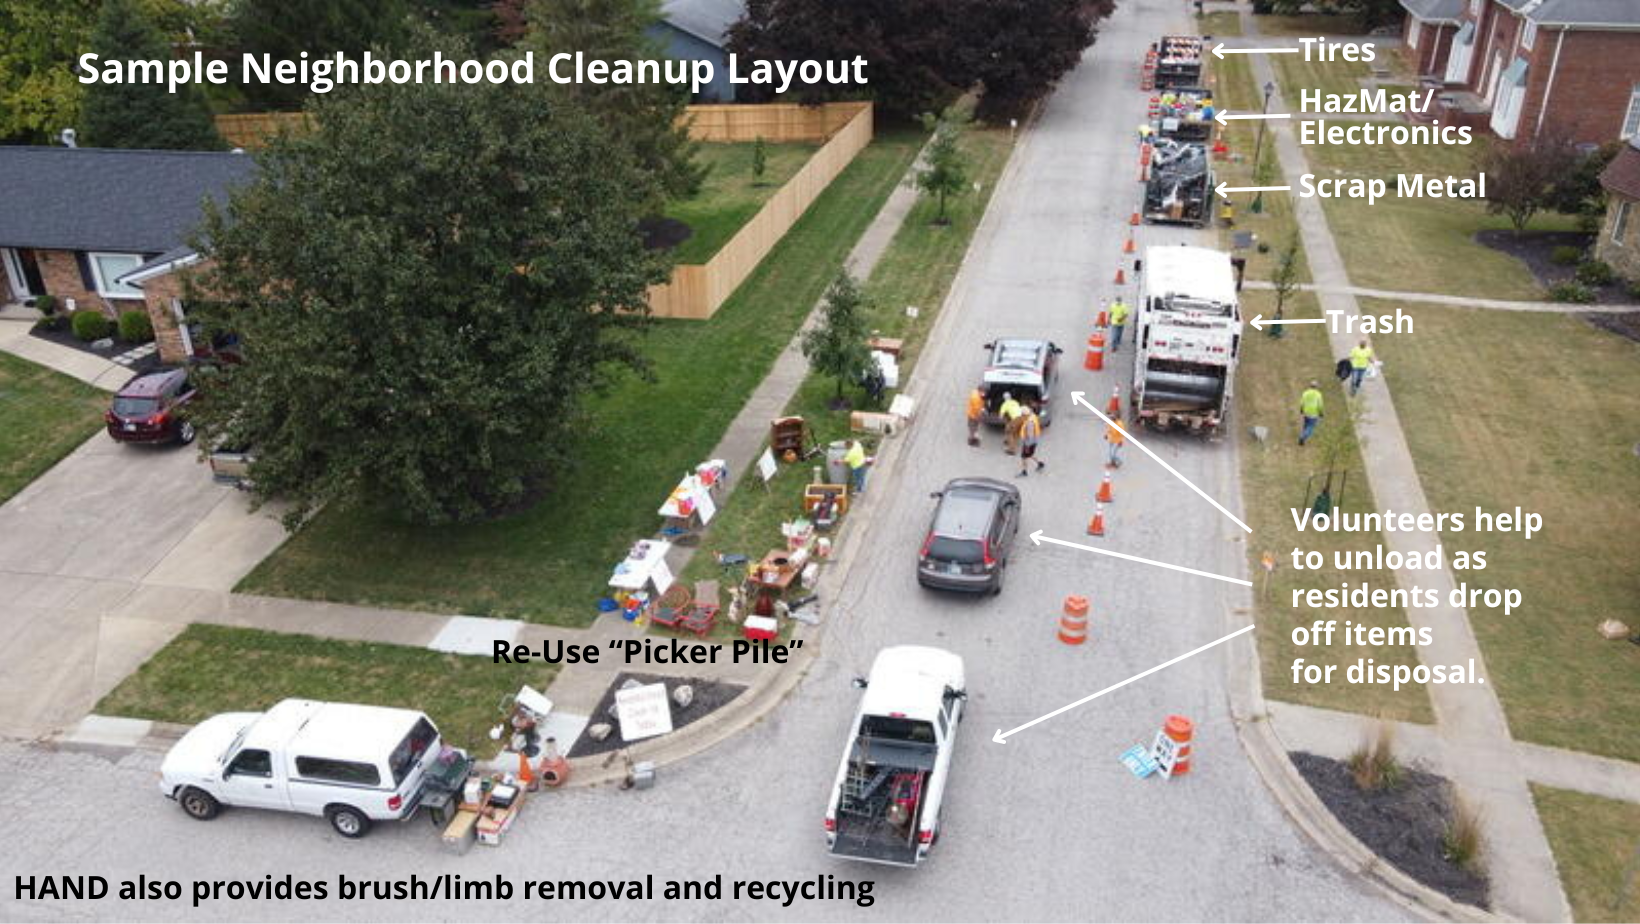 Sample cleanup layout showing trash, scrap metal, hazmat, tires, and re-use collection areas